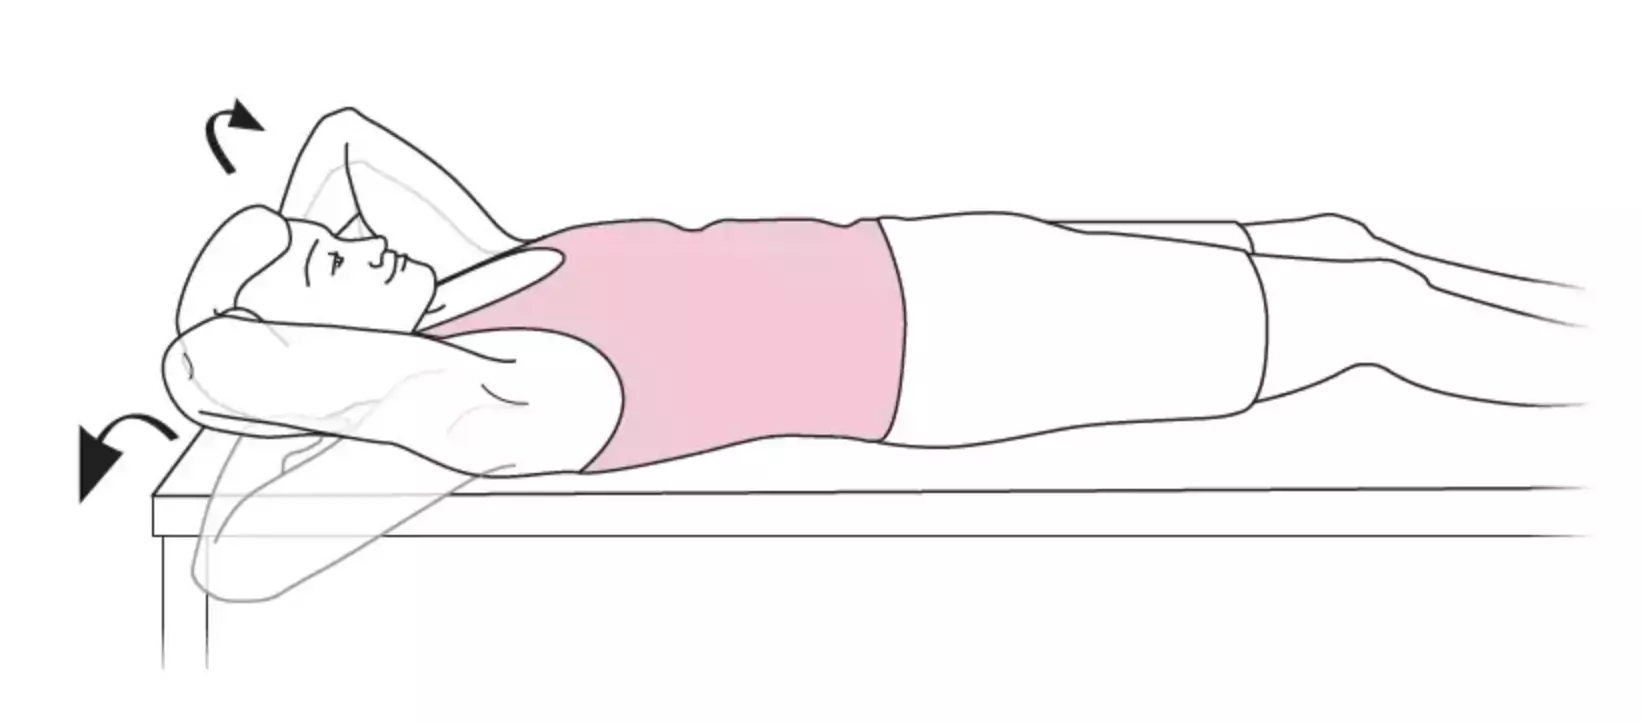 External-rotation stretching: place your hands behind your head (on your forehead in the early stages if you feel too much pain) and spread your elbows until you feel comfortable. Can be performed lying down, sitting or standing. Repeat 10 times.